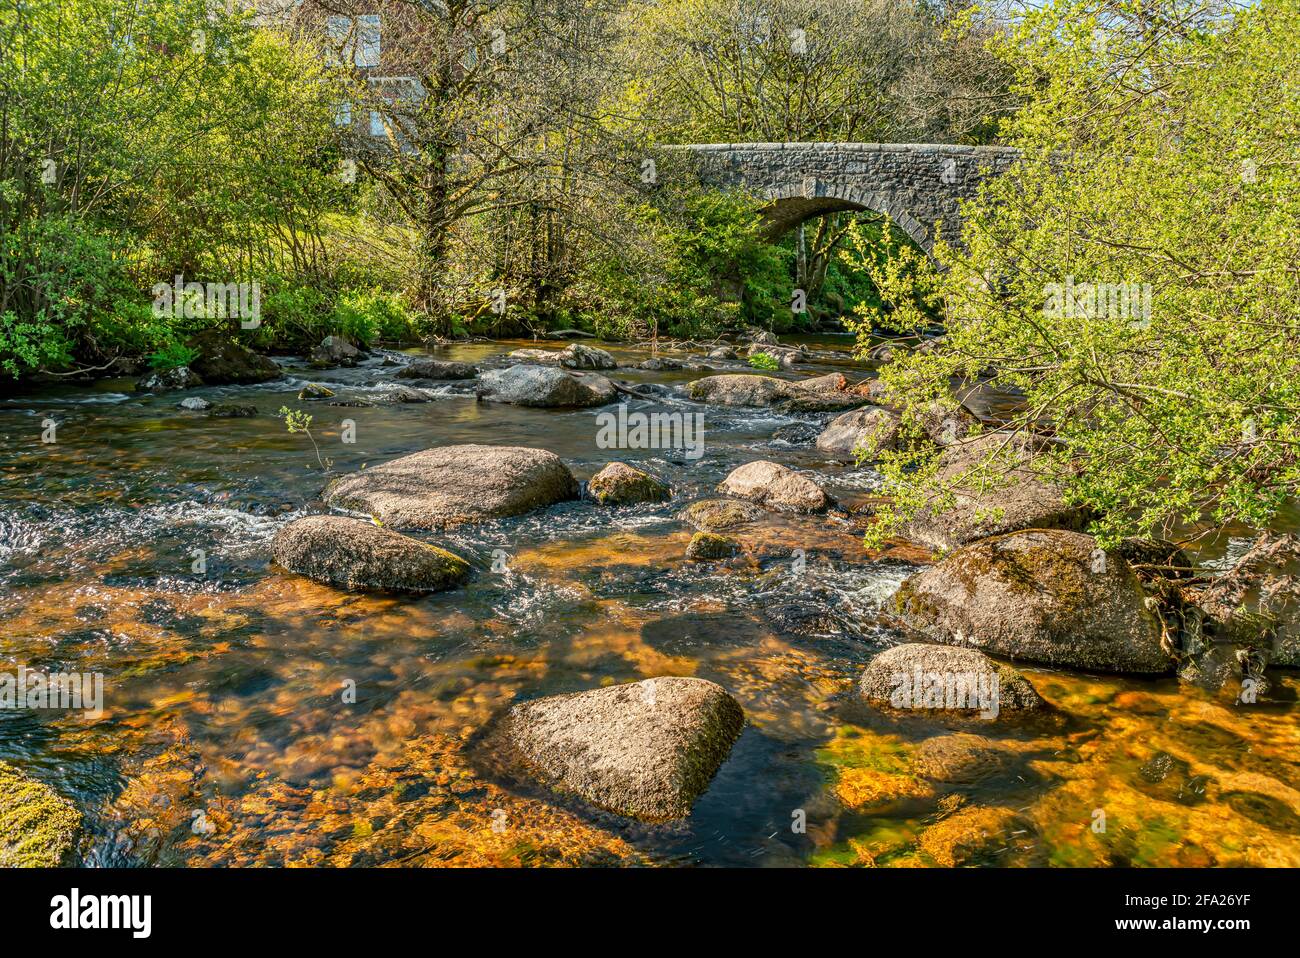 Cherry Brook River at the Castles in the Dart Valley, Dartmoor National Park, Devon, England, UK Stock Photo